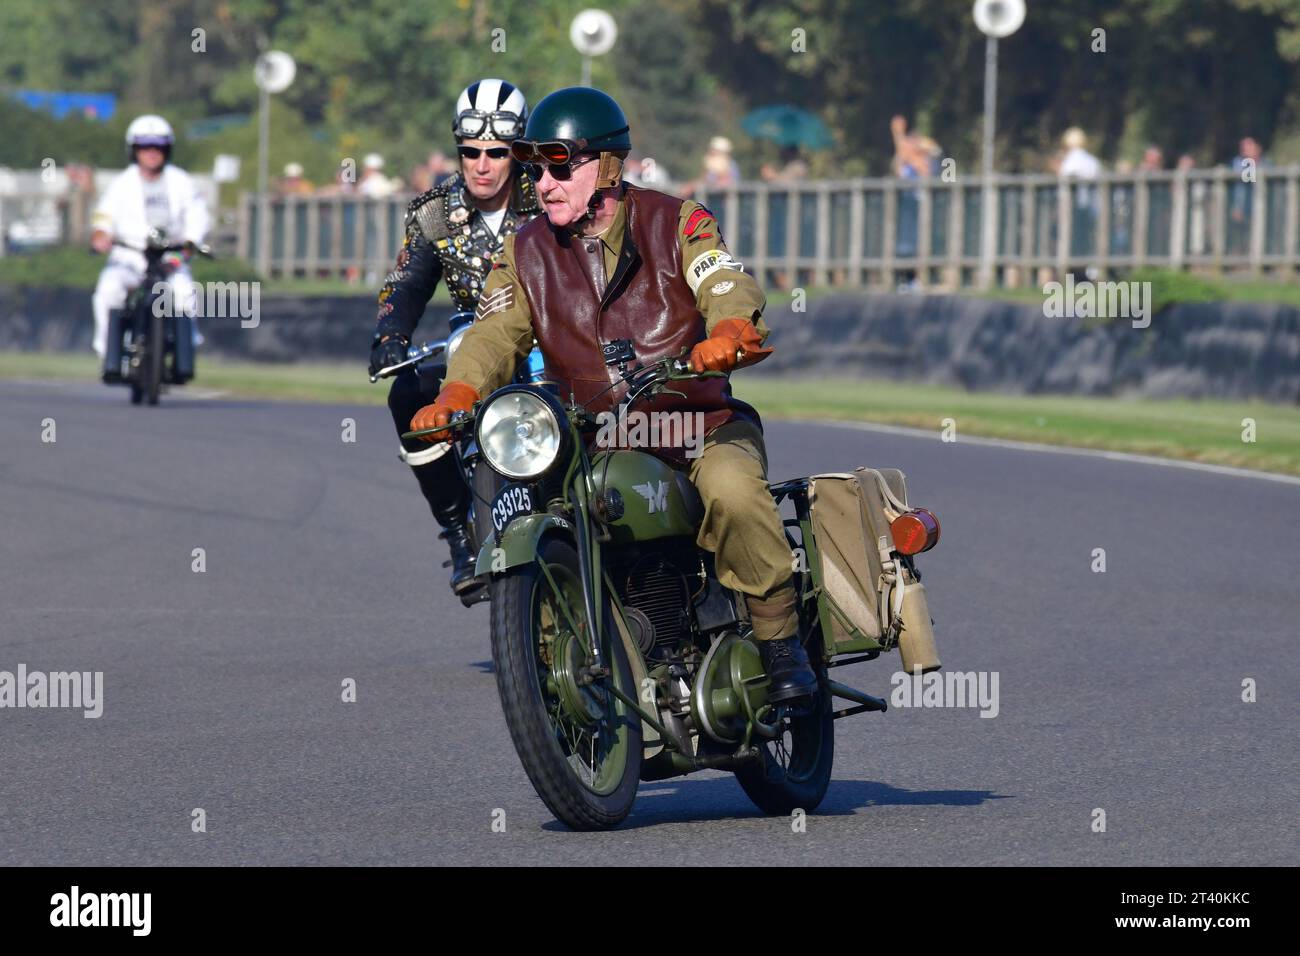 ex-military Matchless, Track Parade - Motorcycle Celebration, circa 200 bikes featured in the morning parade laps, including sidecar outfits and motor Stock Photo